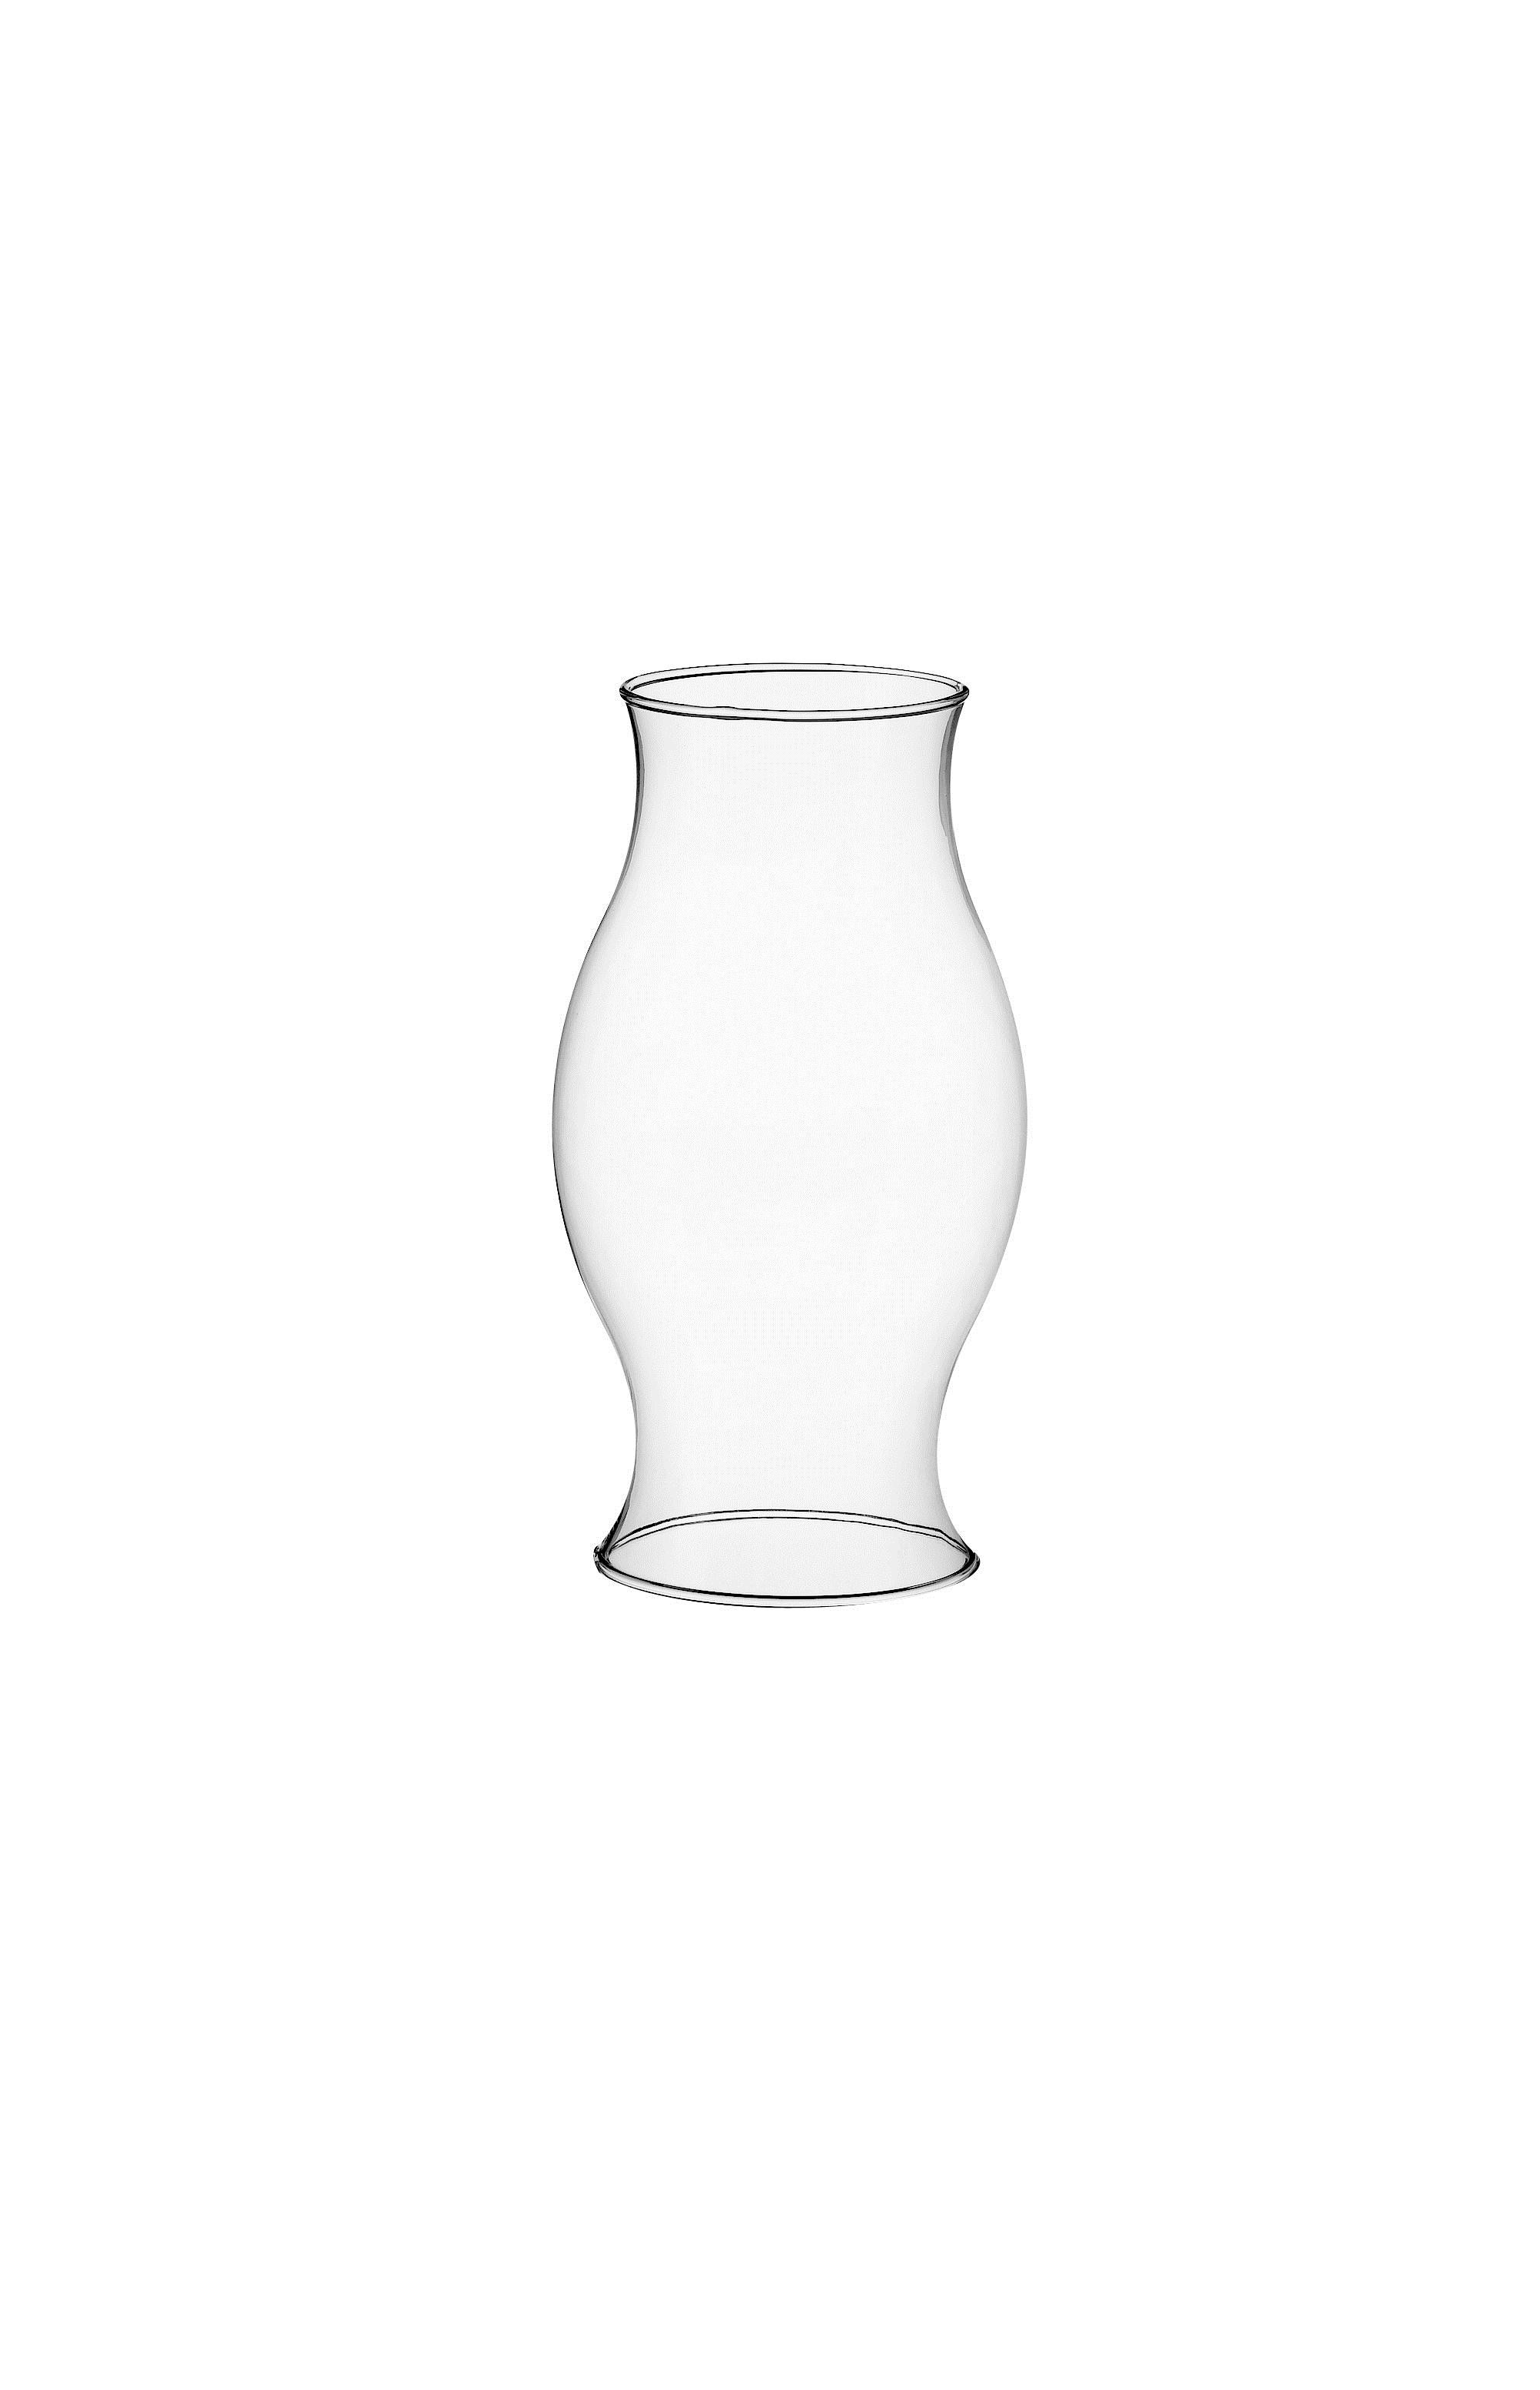 14 Perfect Large Glass Cube Vase 2024 free download large glass cube vase of perri farms inside vase hurricane glass 6 clear 4 5 op pk 4